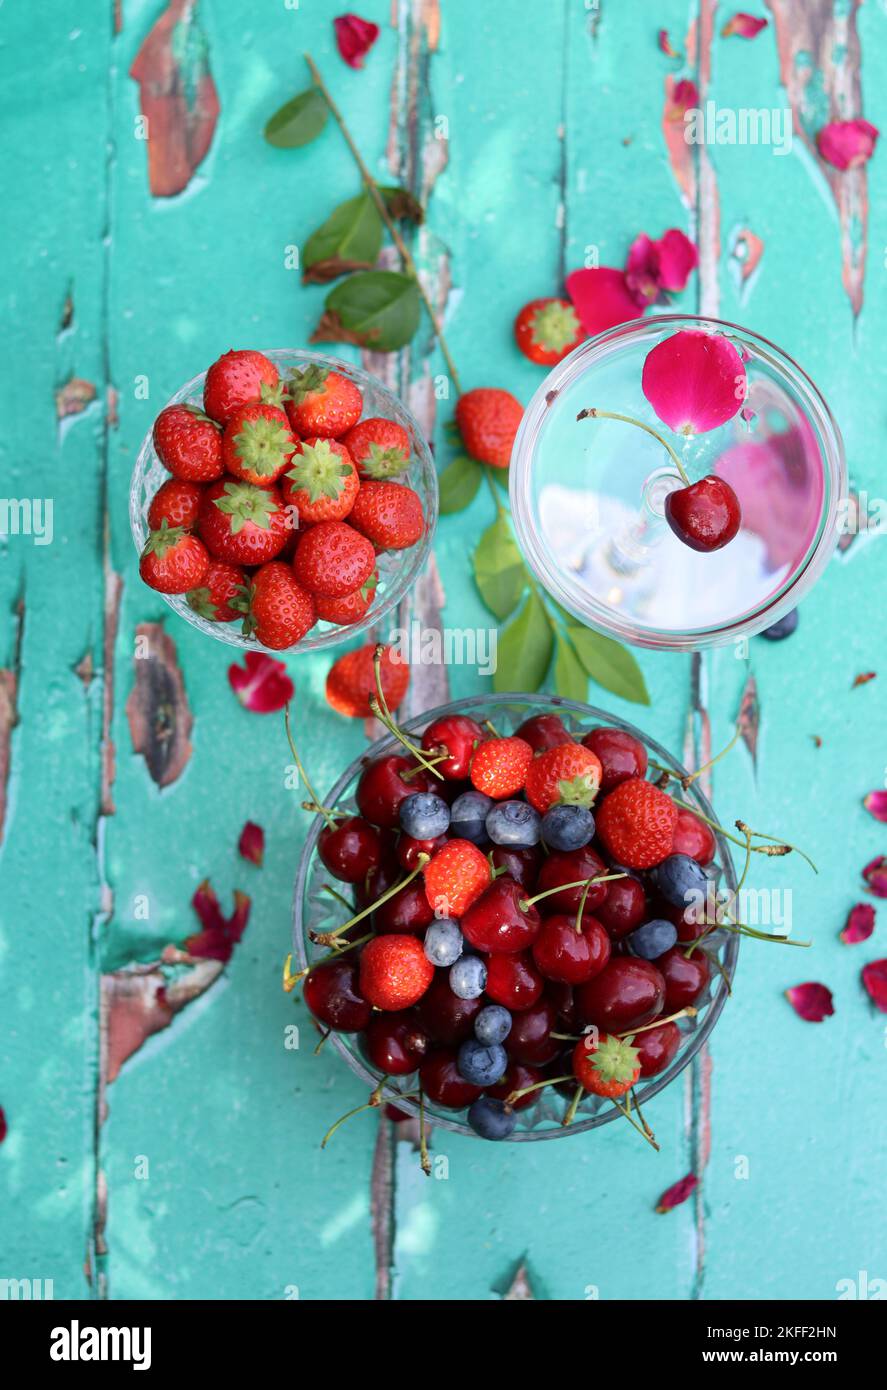 Simple composition still life photo with fresh berries. Seasonal fruit close up photo. Eating healthy concept. Stock Photo